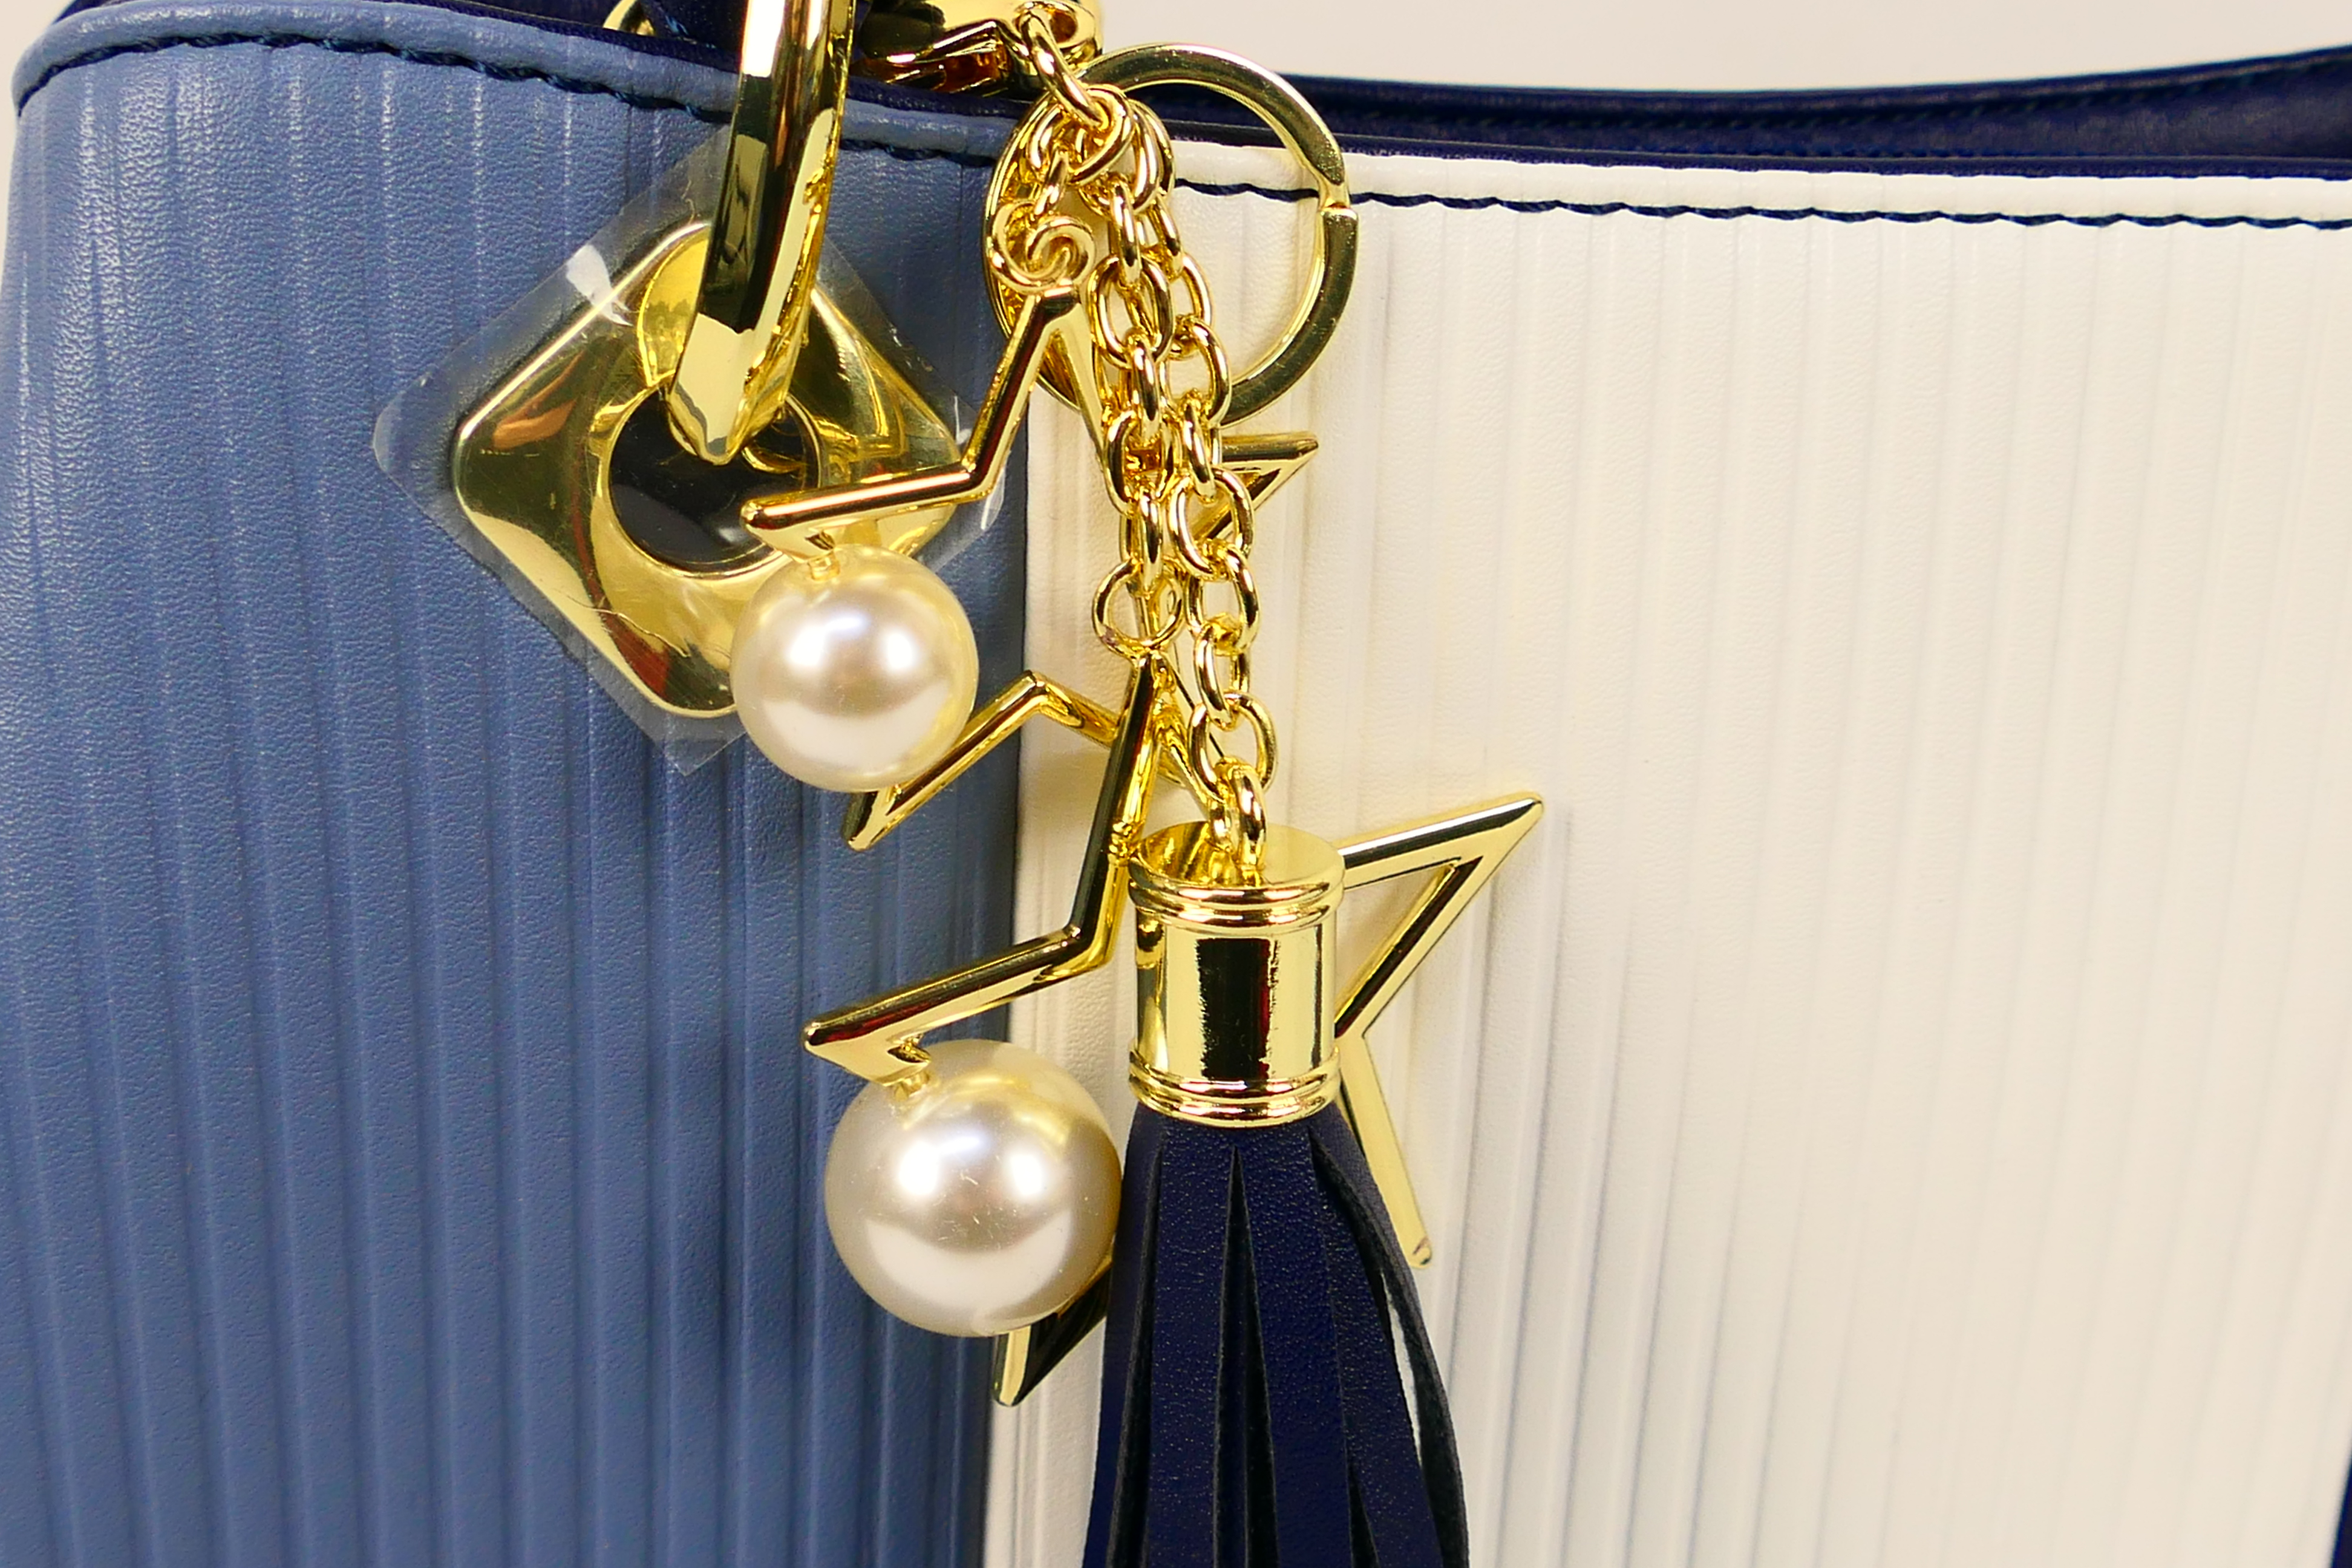 Pomelo Best - A Pomelo Best handbag in tones of blue and white. - Image 3 of 6